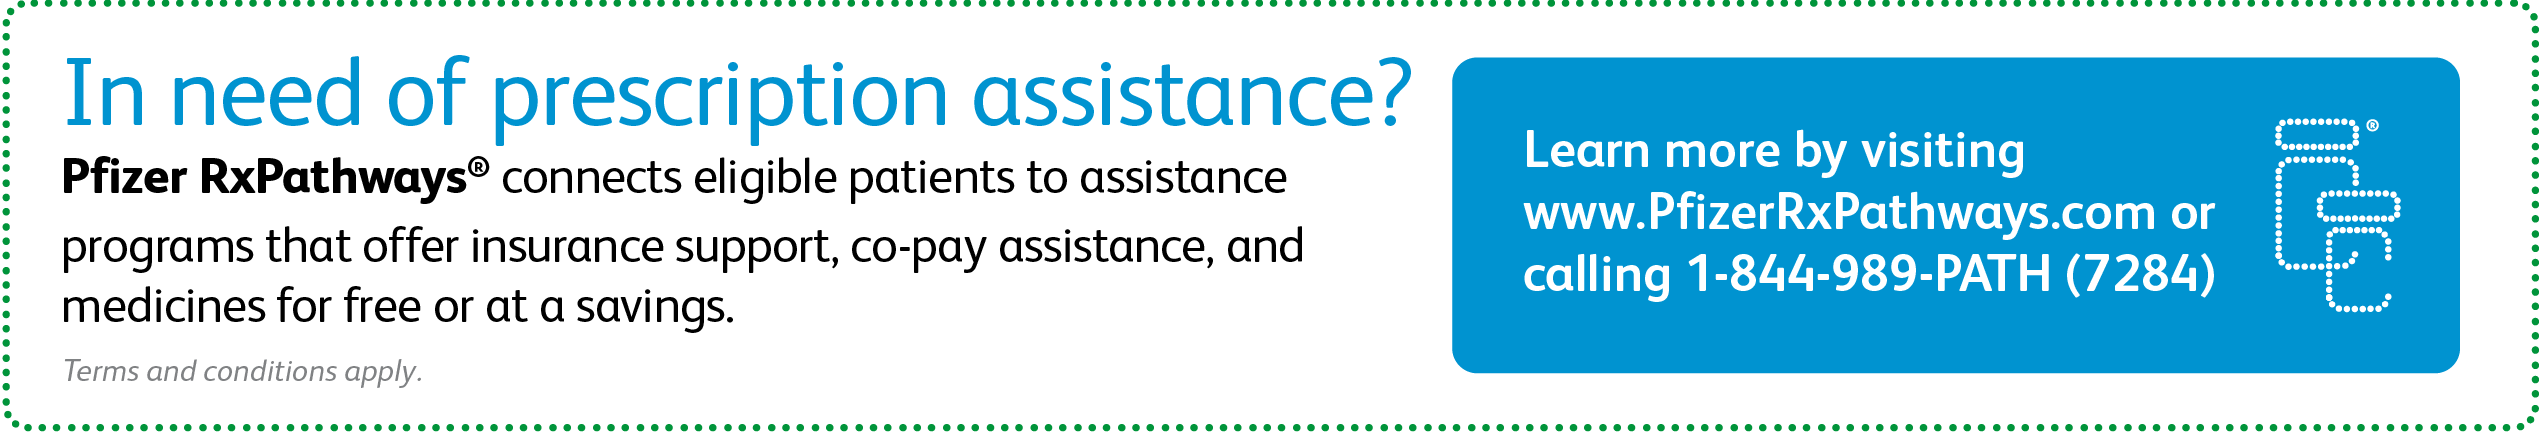 Pfizer RxPathways offers eligible patients assistance programs to help with their insurance support, co-pay, and prescription medications.